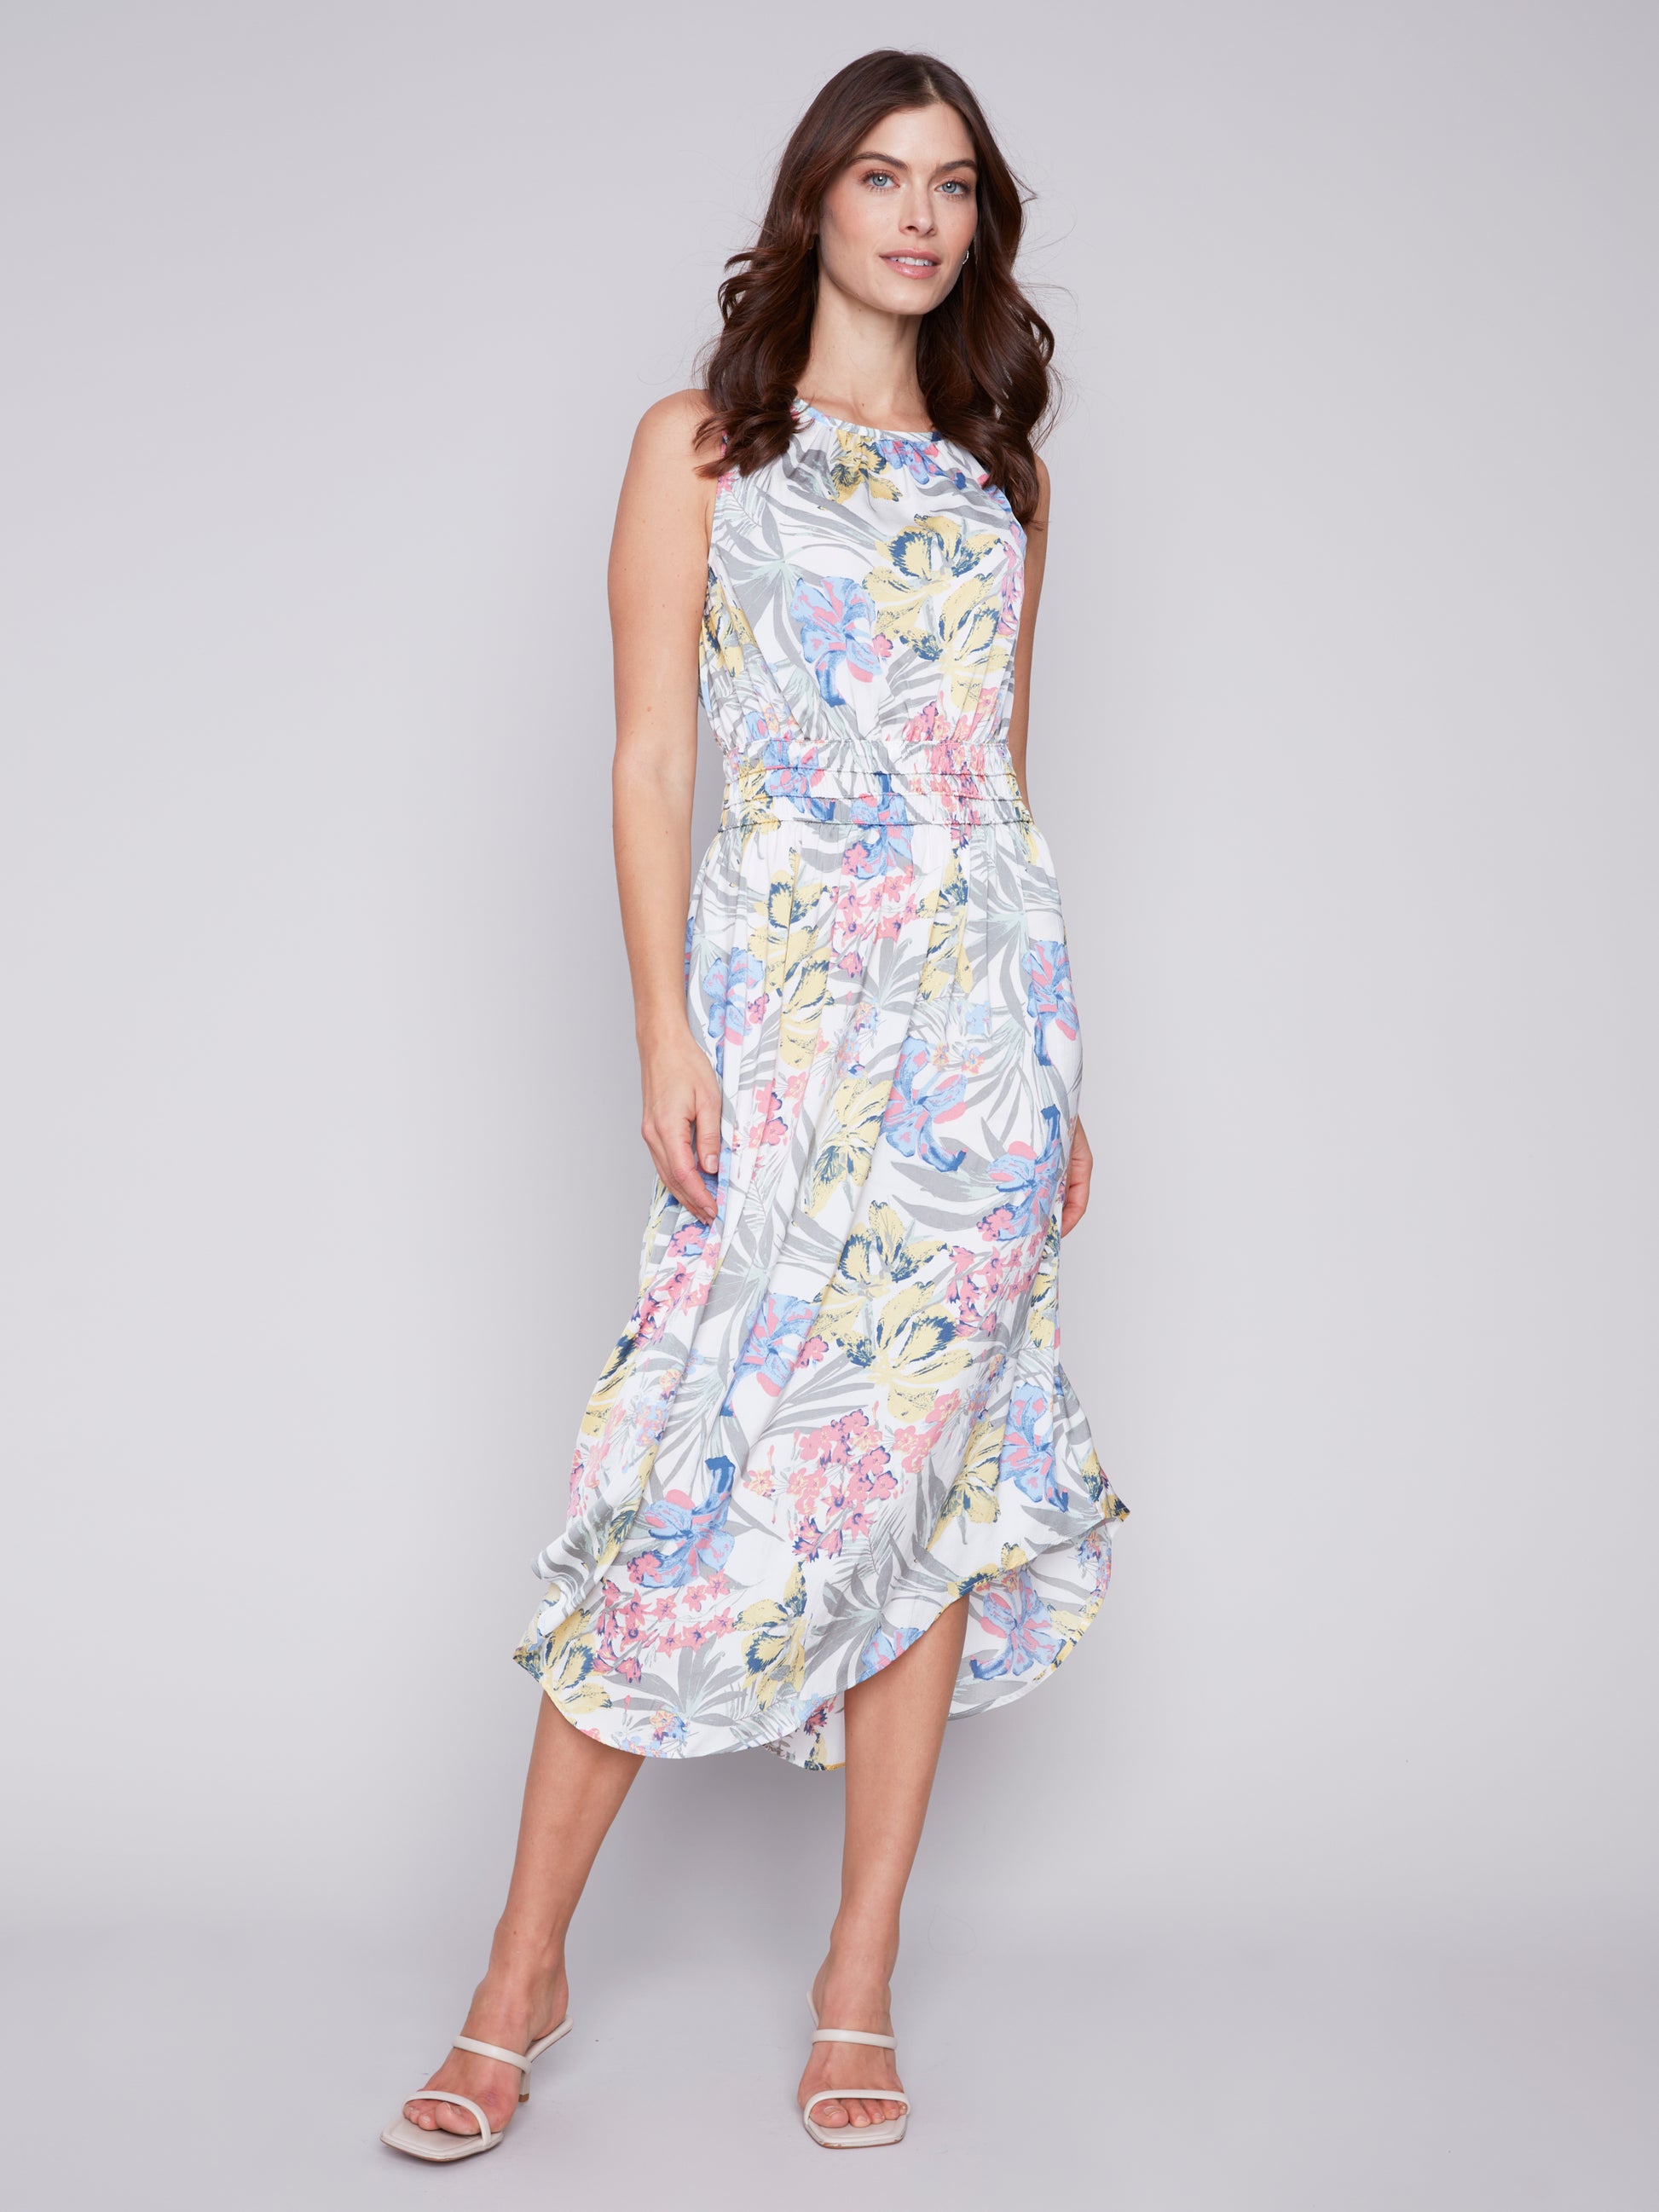 A woman in a Charlie B Petal Path Sleeveless Dress with Elastic Smocking Waist posing against a neutral background.